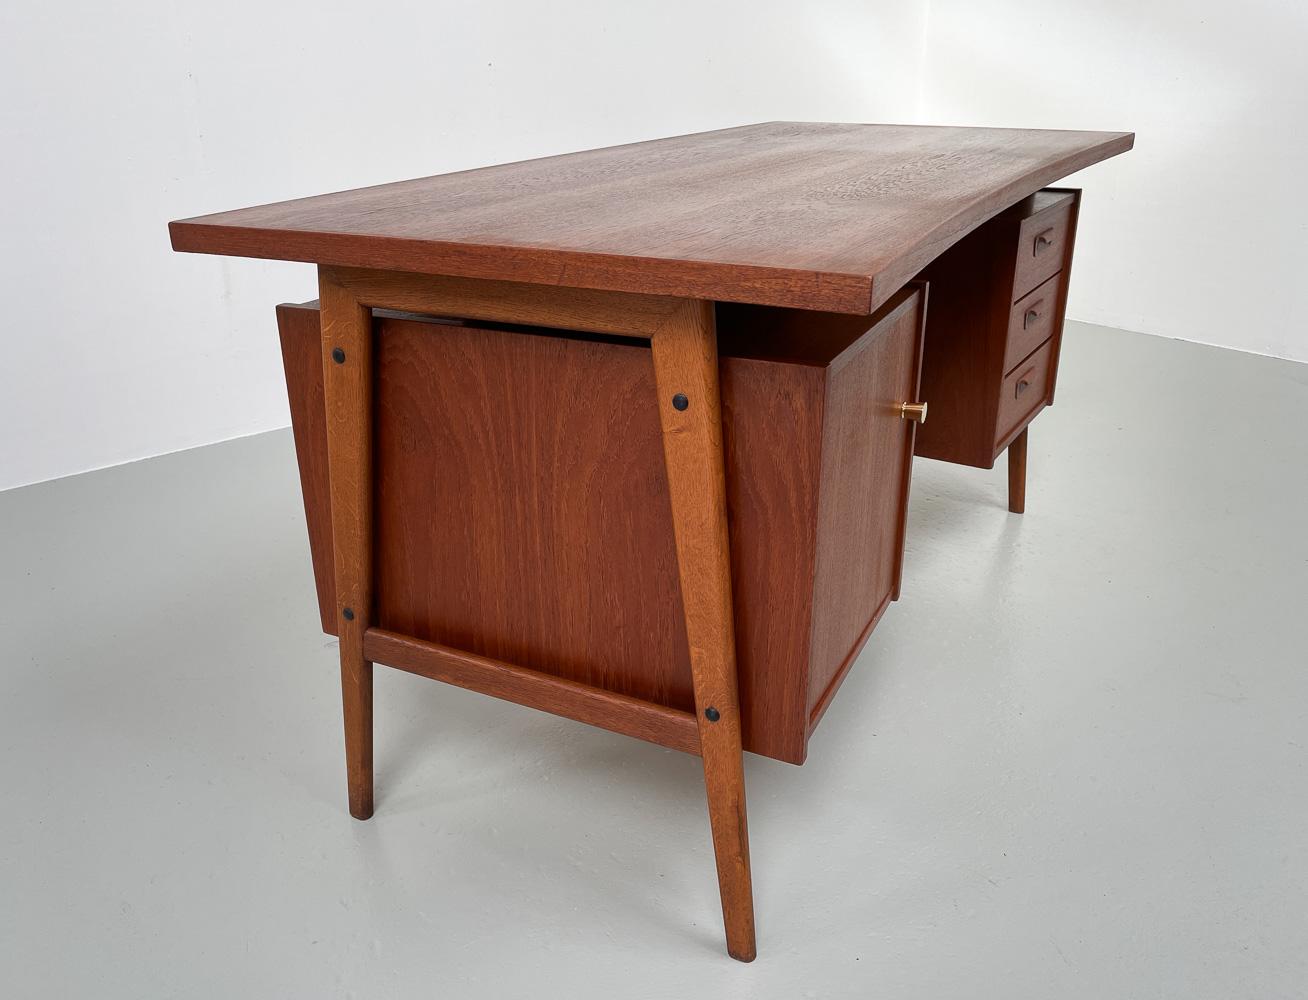 Vintage Danish Freestanding Teak Desk with Floating Curved Top, 1960s.
Scandinavian Mid-Century Modern teak writing desk made in Denmark in the 1960s.
This large unusual executive desk has both a floating and boomerang shaped table top. Slanted